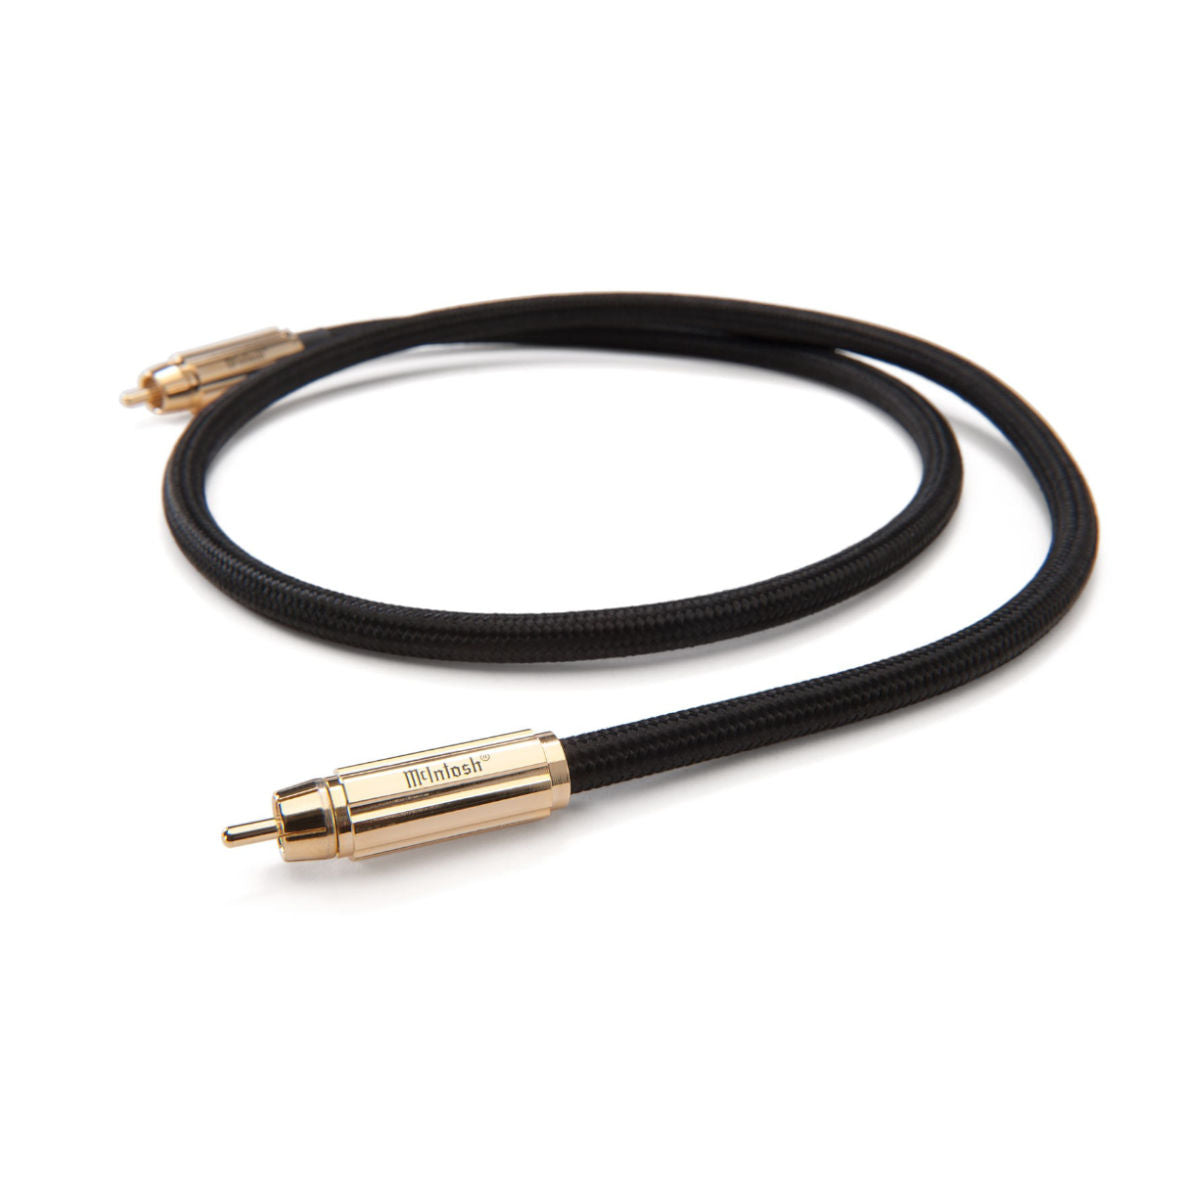 McIntosh Digital Audio Cables (1mtr to 4mtr) - Ooberpad India